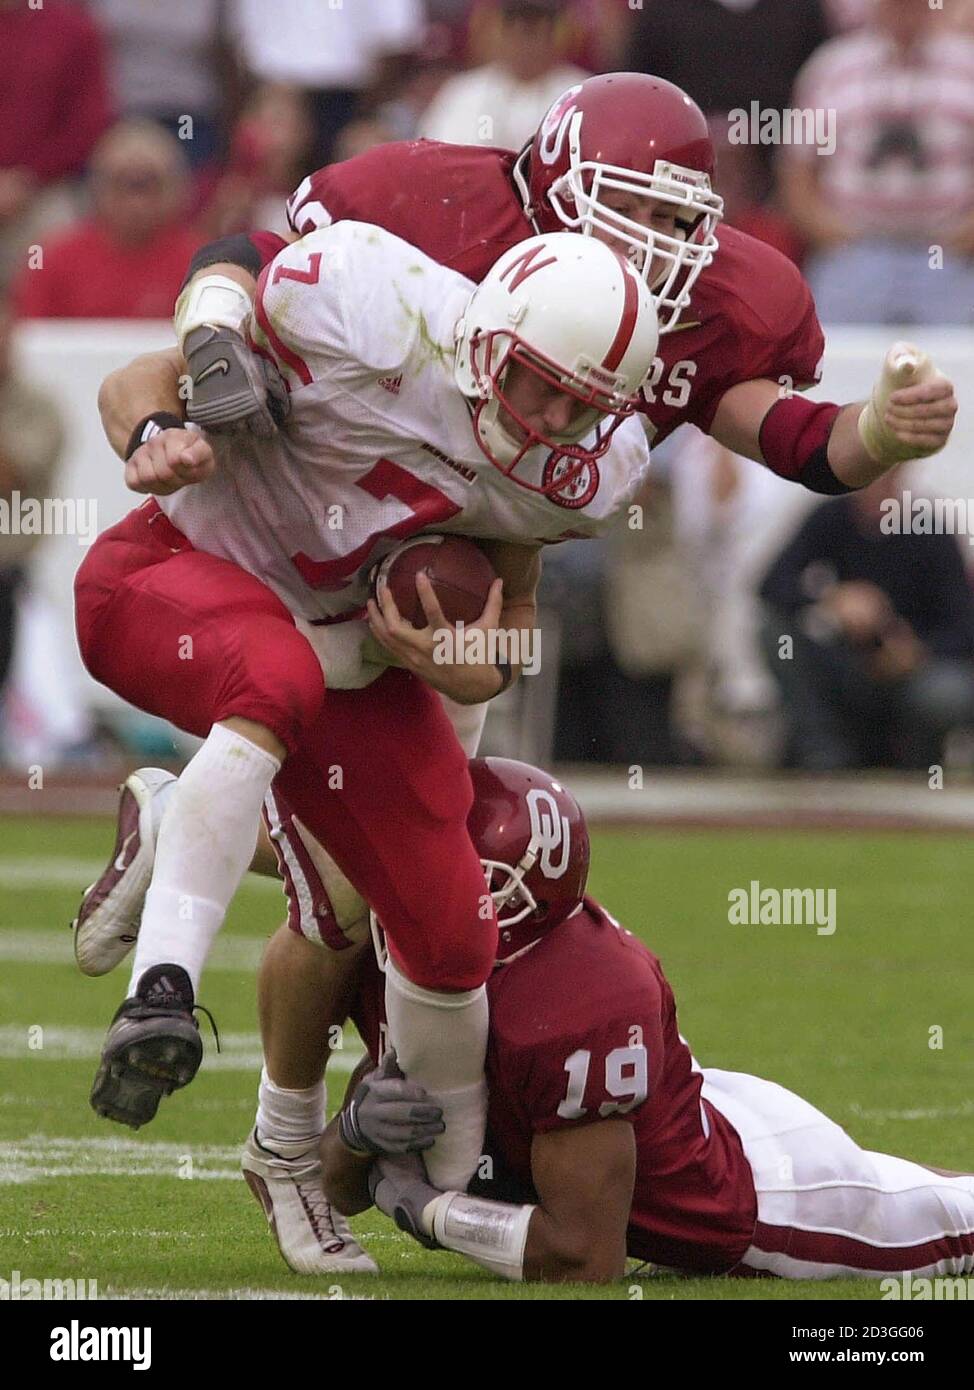 Nebraska's Eric Crouch, 7, is stopped by Oklahoma's Michael Thompson, 19, and Rock Calmus during fourth quarter action, in Norman, Oklahoma, October 28, 2000. Oklahoma defeated Nebraska 31-14.  TK/RCS Stock Photo